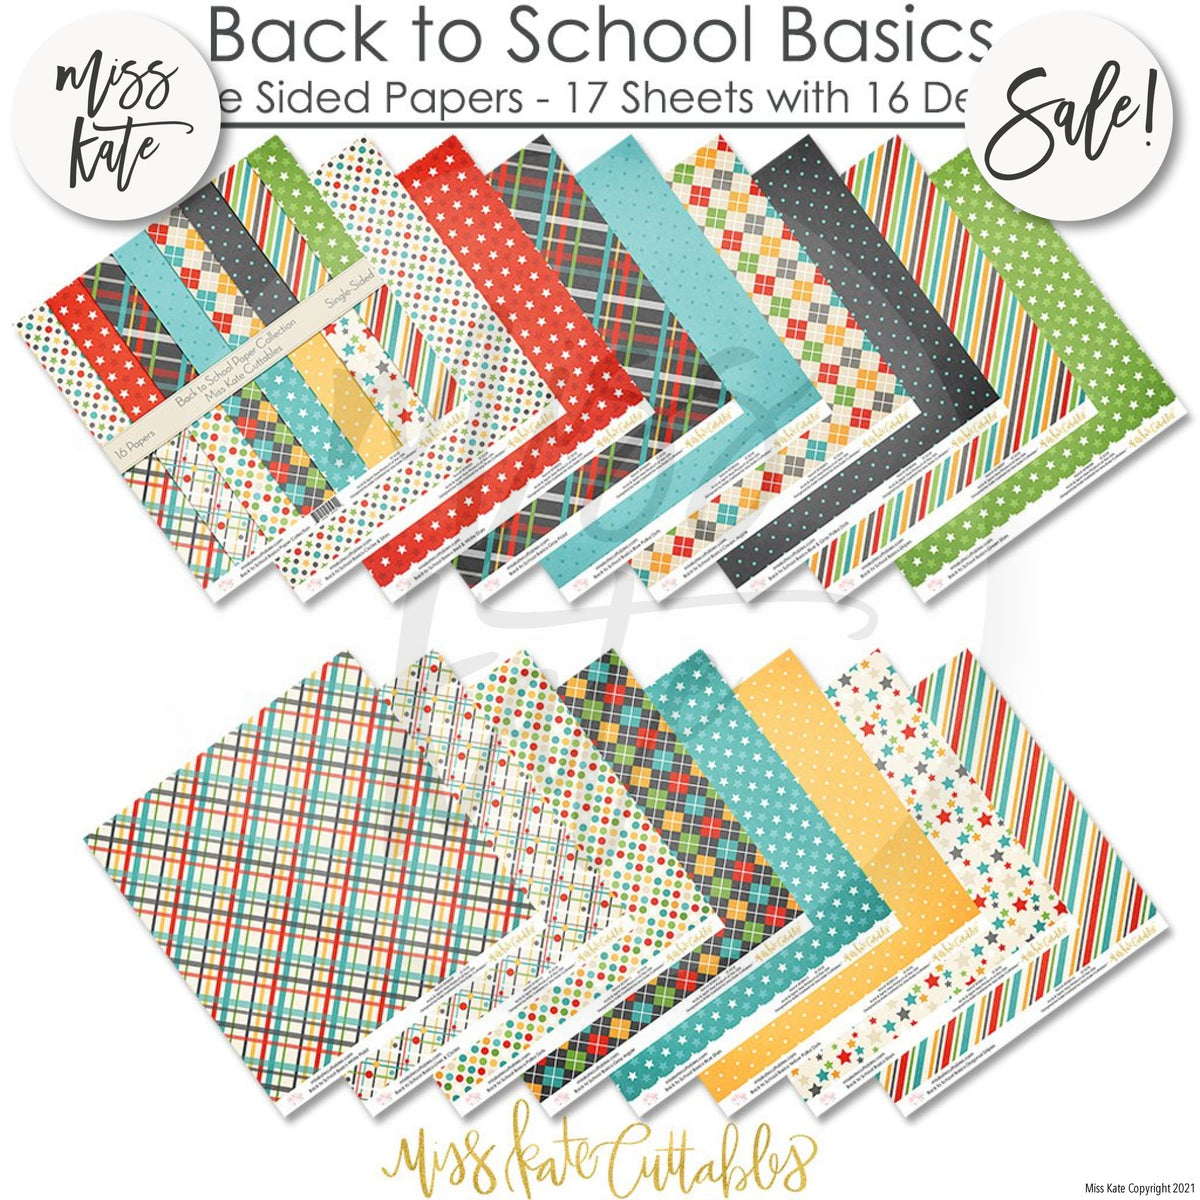 Your Must-Have Back to School Scrapbook Supplies – Creative